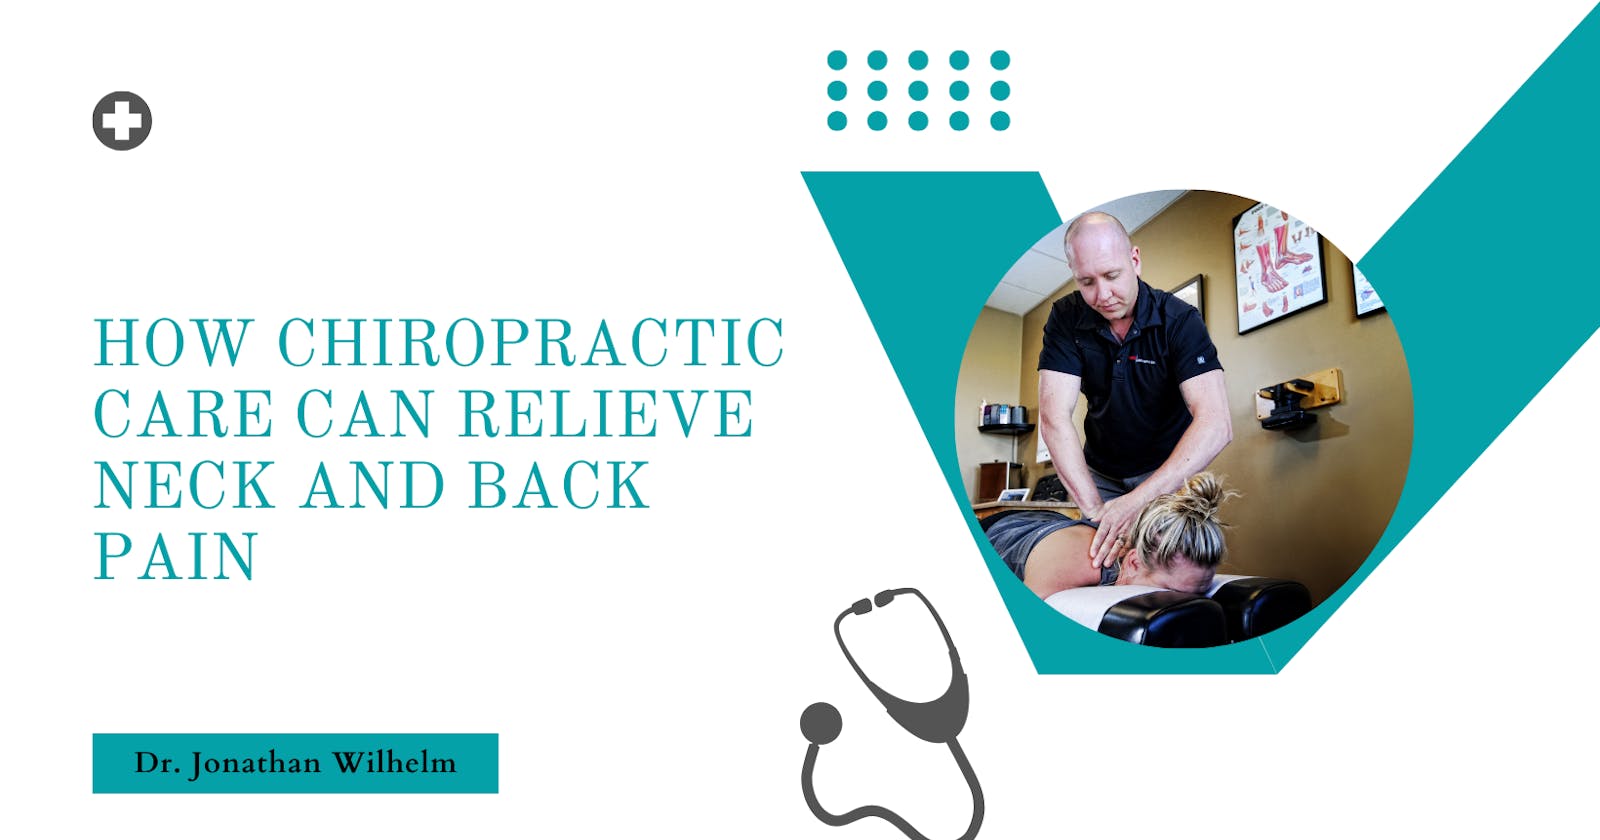 Jonathan Wilhelm | How Chiropractic Care Can Relieve Neck and Back Pain